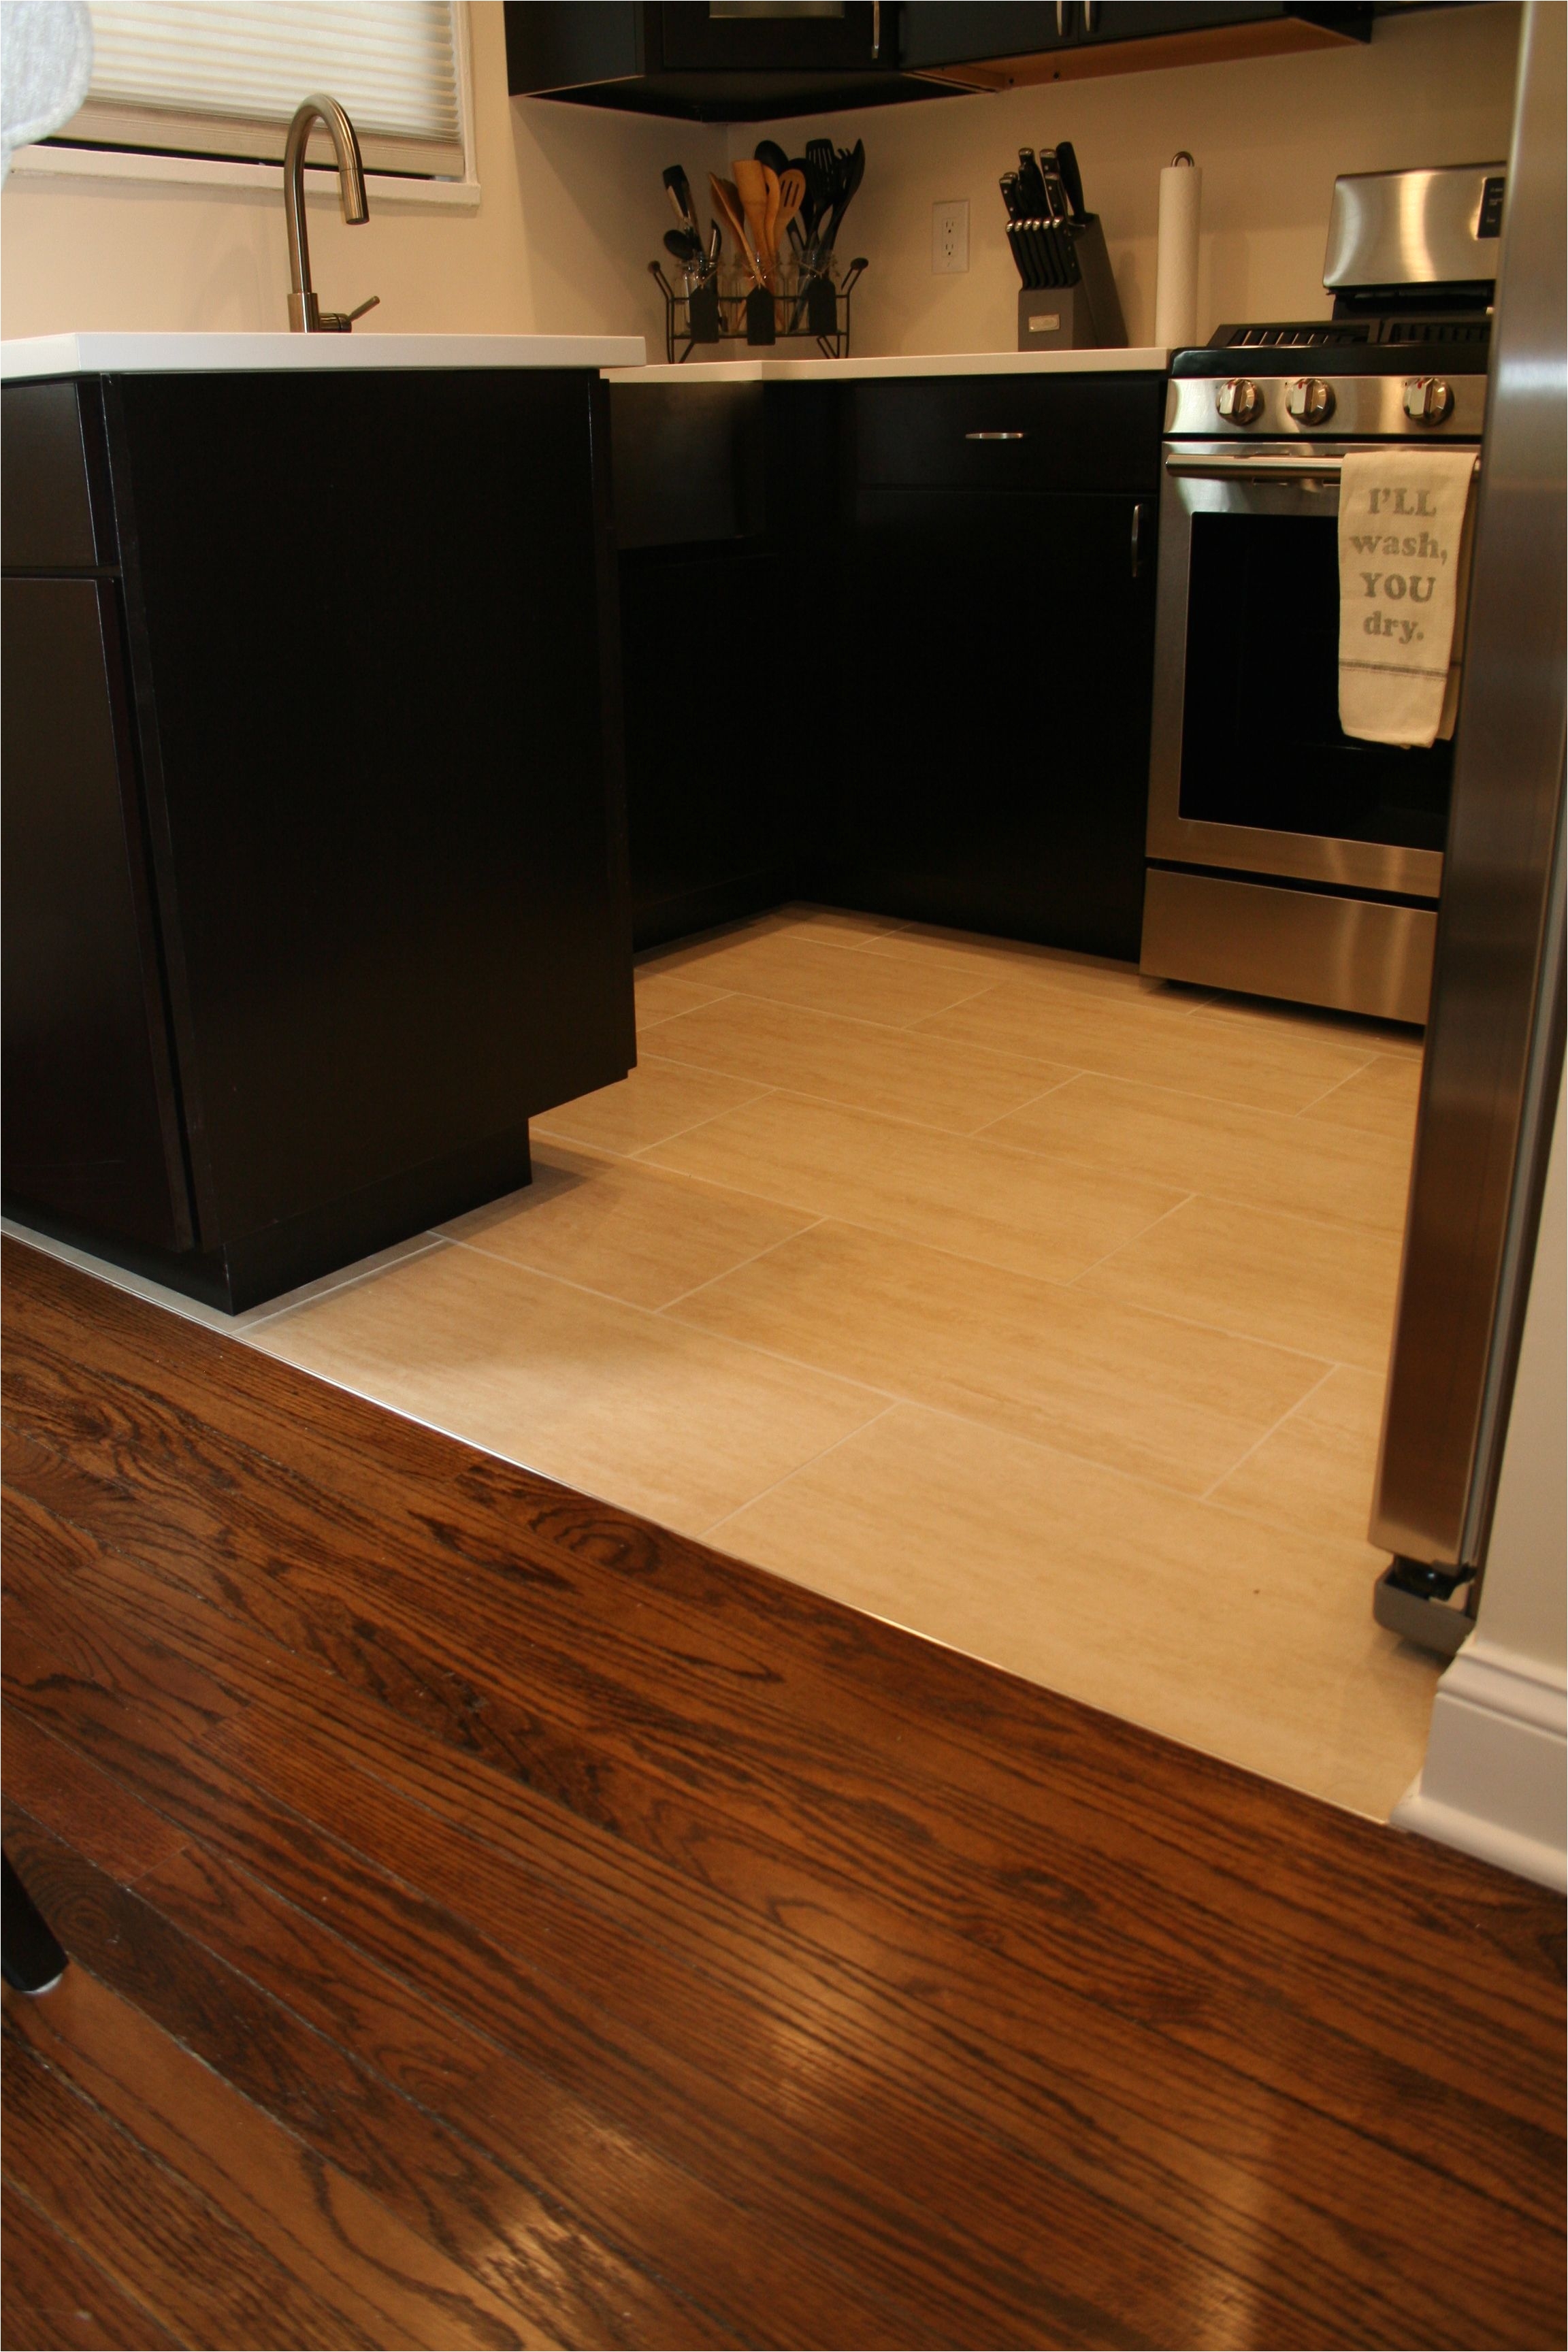 Can You Deep Clean Hardwood Floors Transition From Tile to Wood Floors Light to Dark Flooring Concept